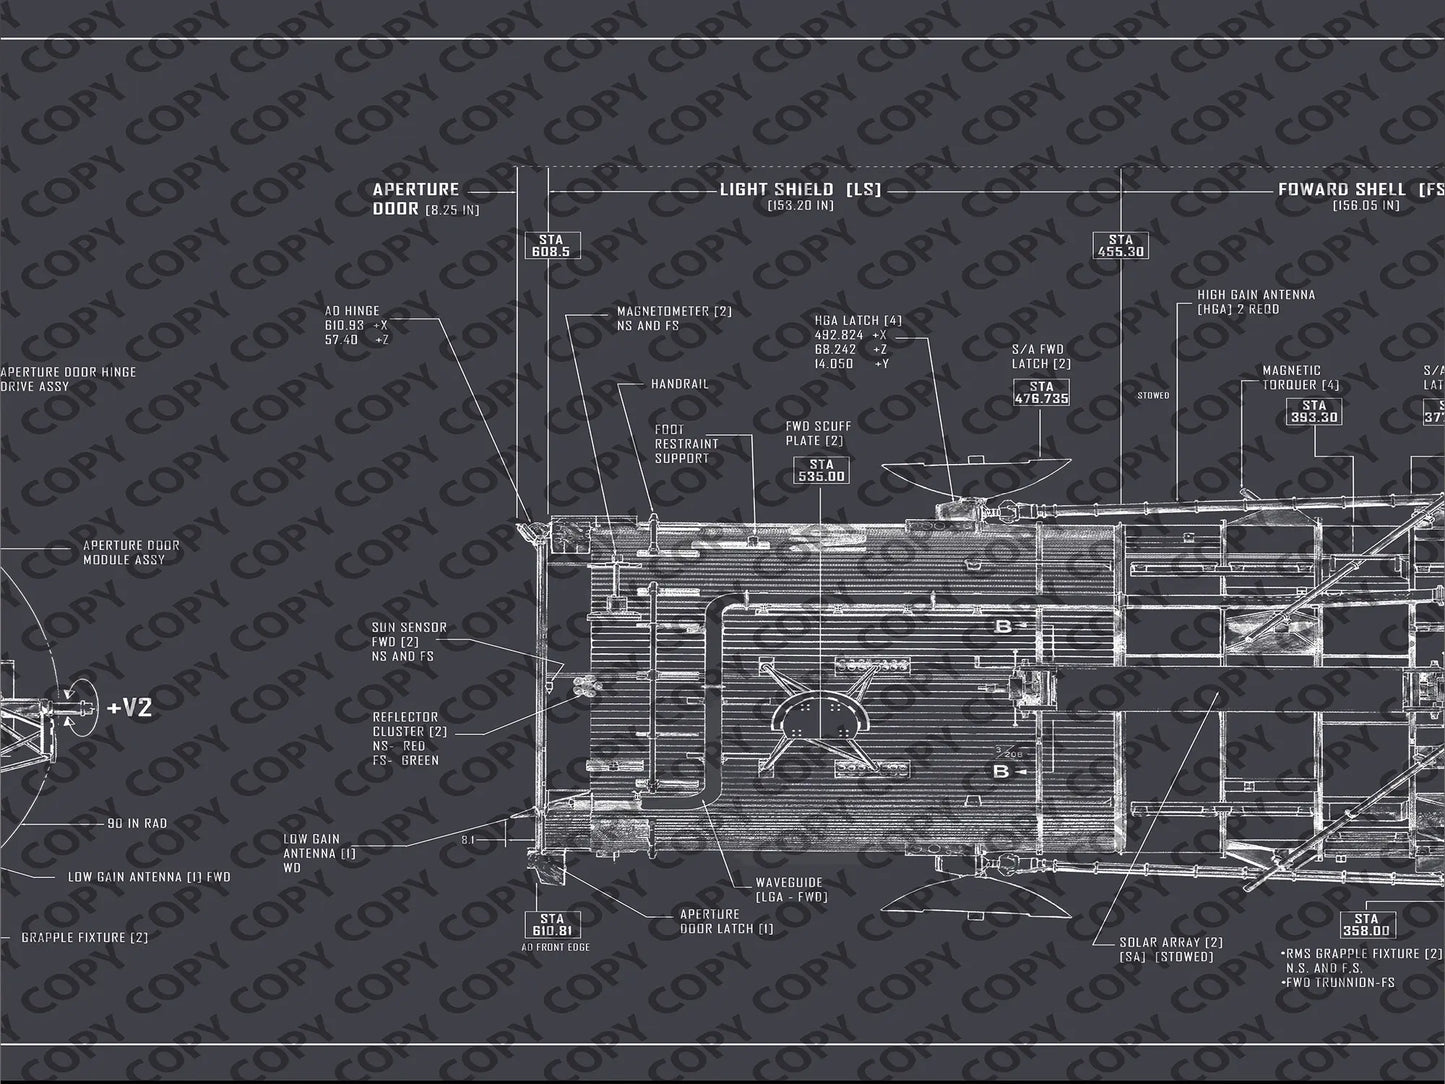 Hubble Space Telescope Blueprint | Rocket Blueprint Posters | A close-up section of the NASA Hubble Space Telescope blueprint, showcasing detailed technical drawings with labels for elements such as the aperture door, reflector cluster, and waveguide against a dark background.